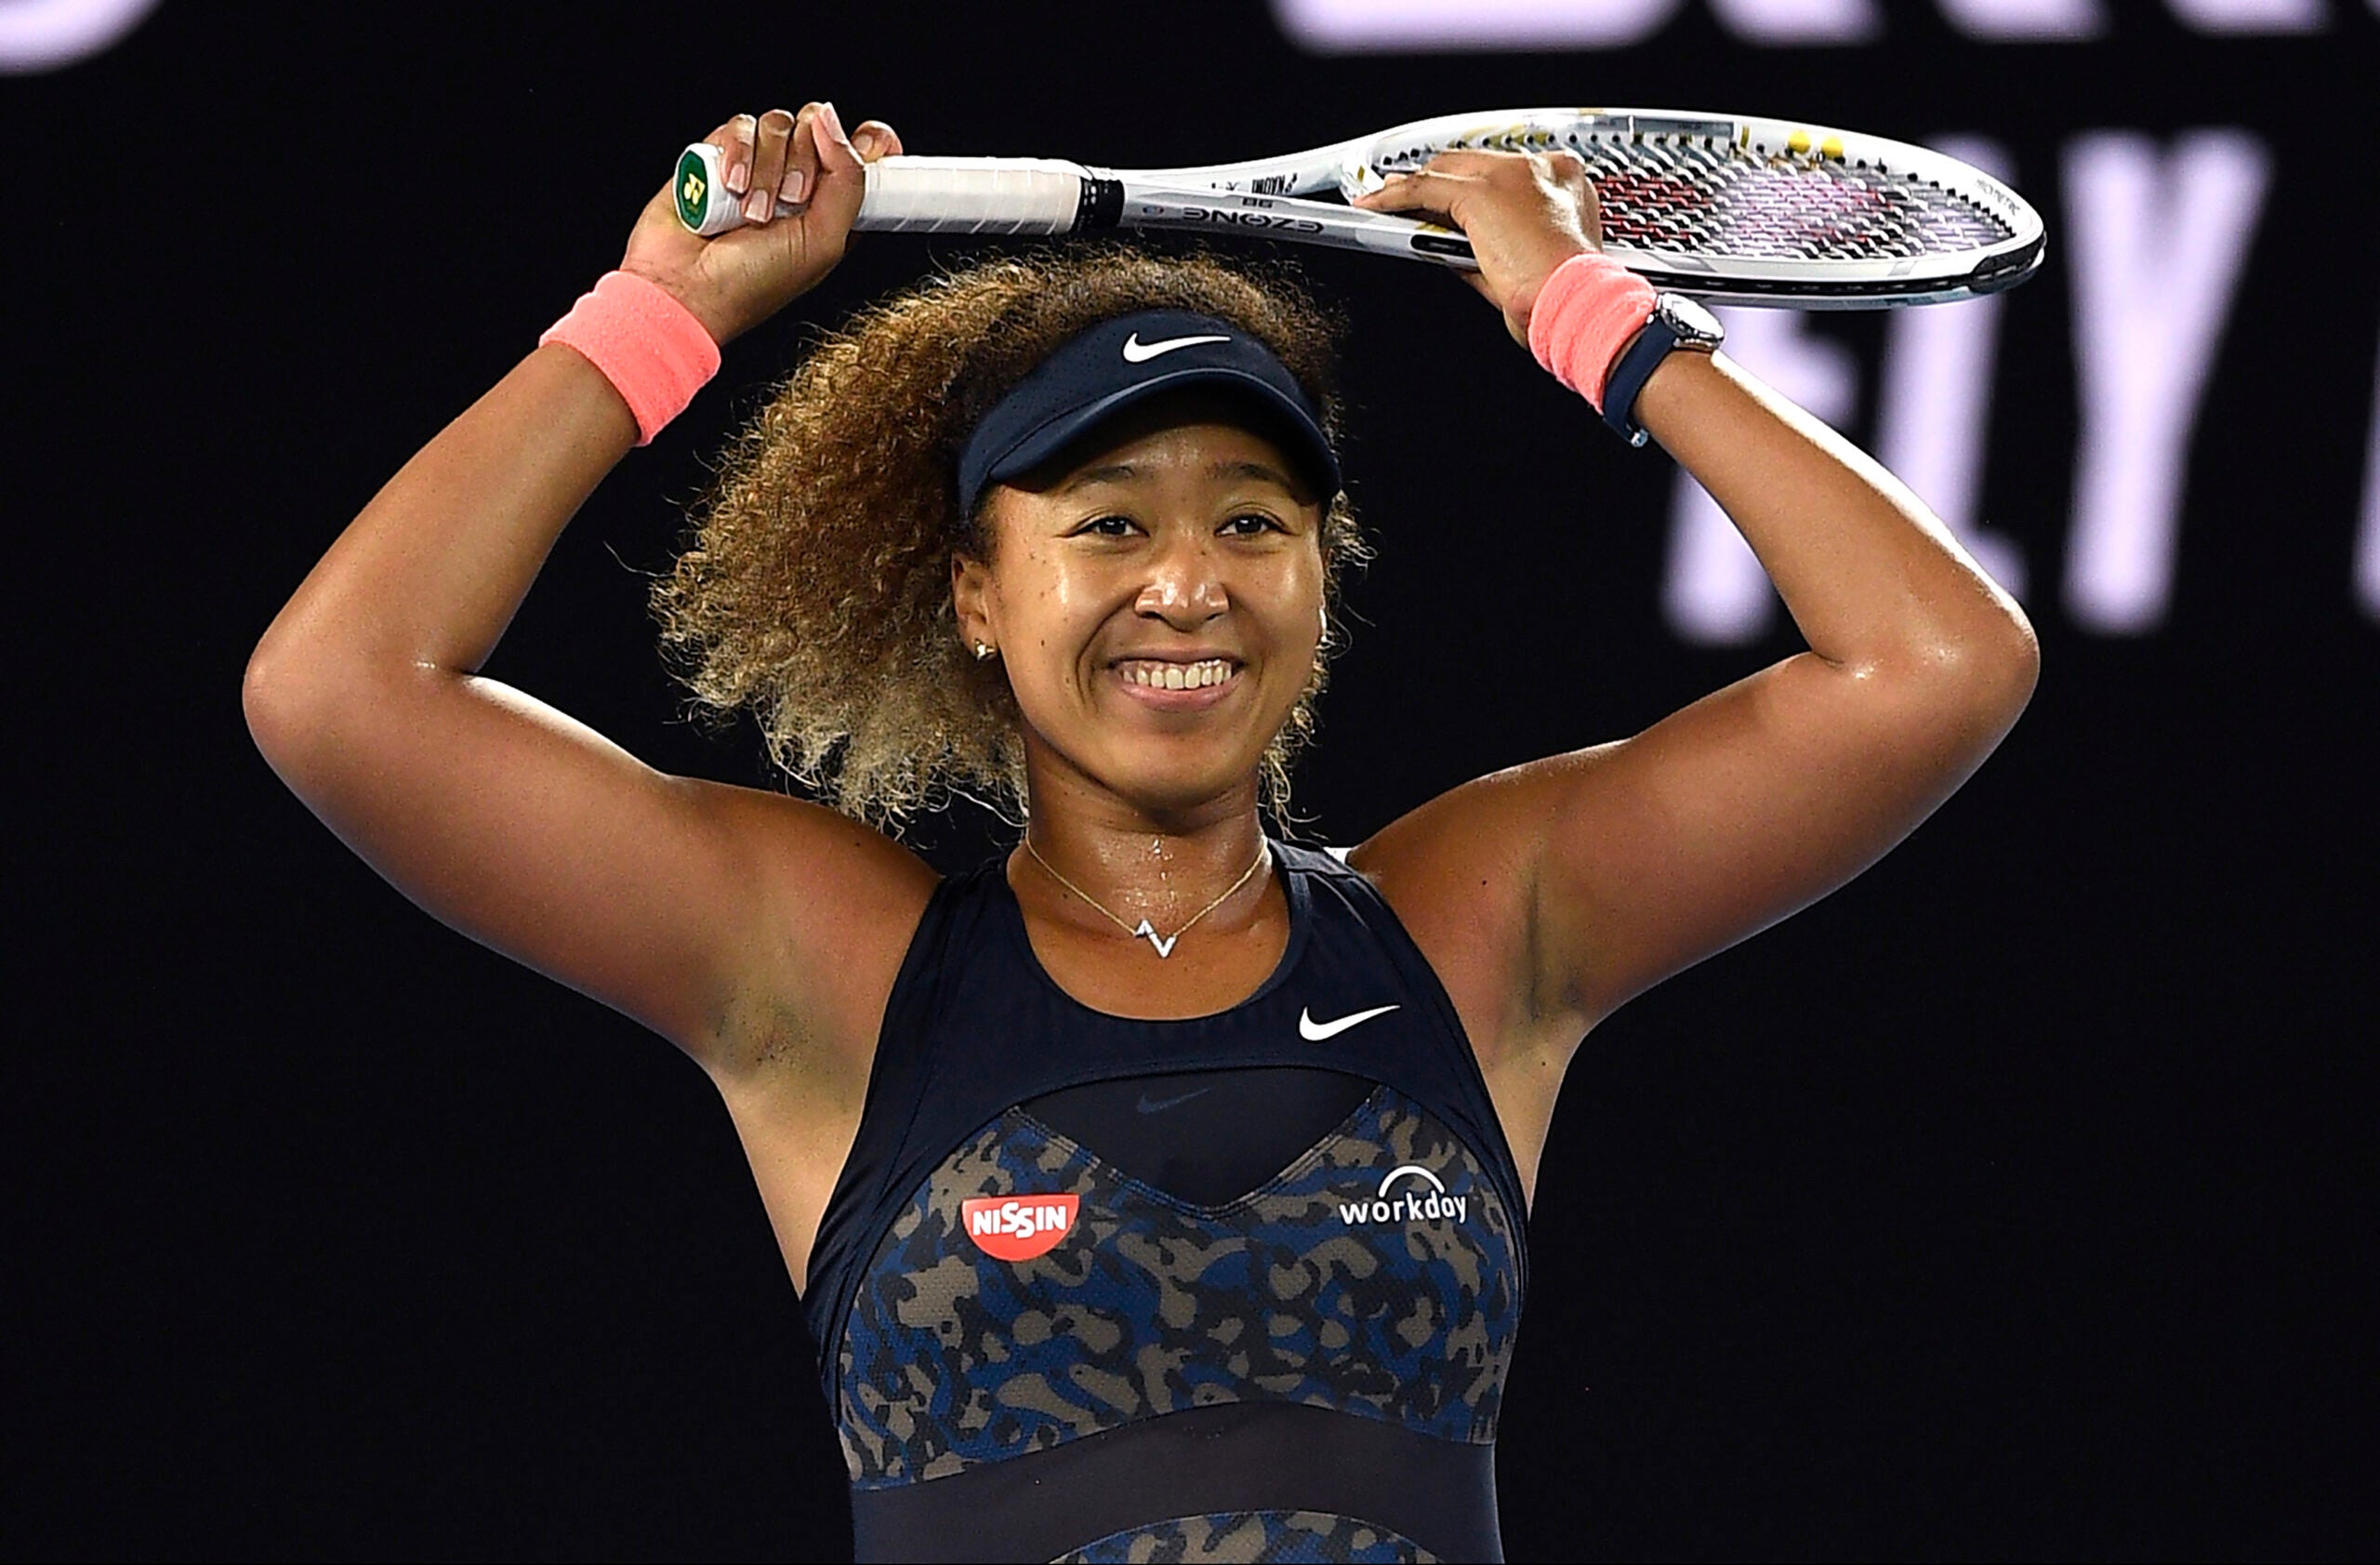 4 for 4: Osaka wins Open, stays perfect in Slam finals